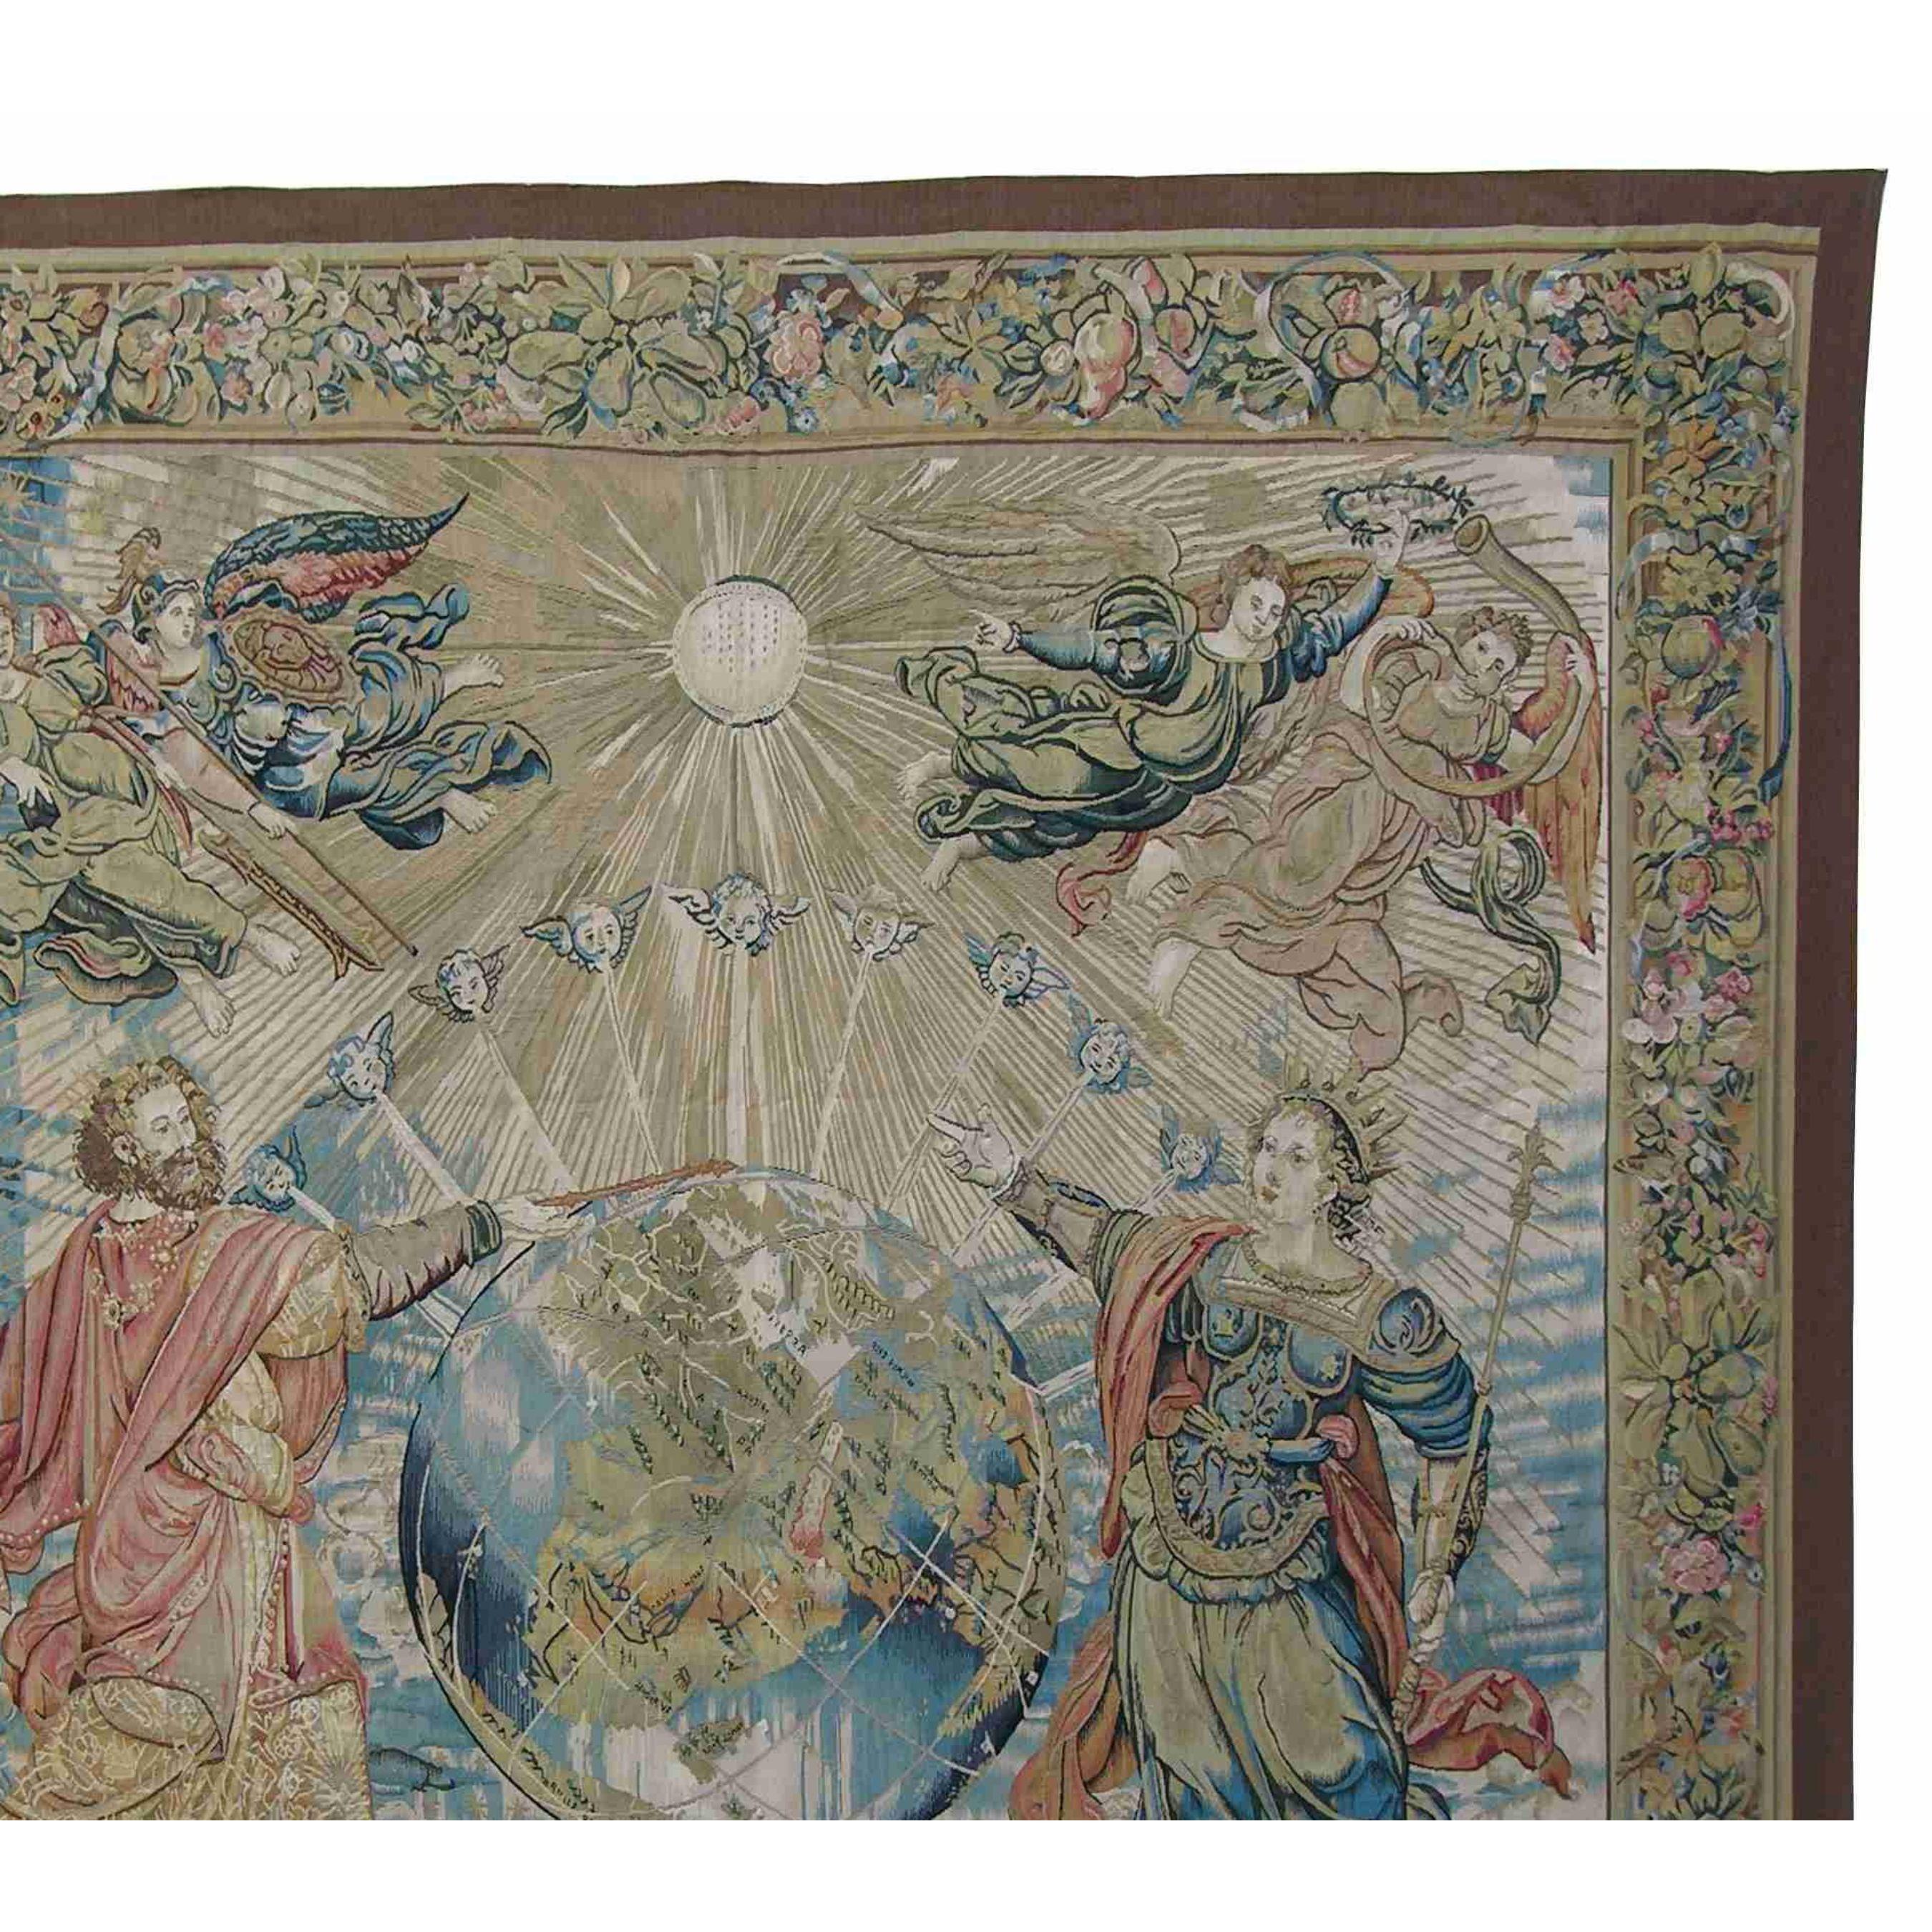 Authentic French Needlework Tapestry 8'2'' X 7' Ft, Authentic, Traditional, Perfect Condition, One Of The Kind.